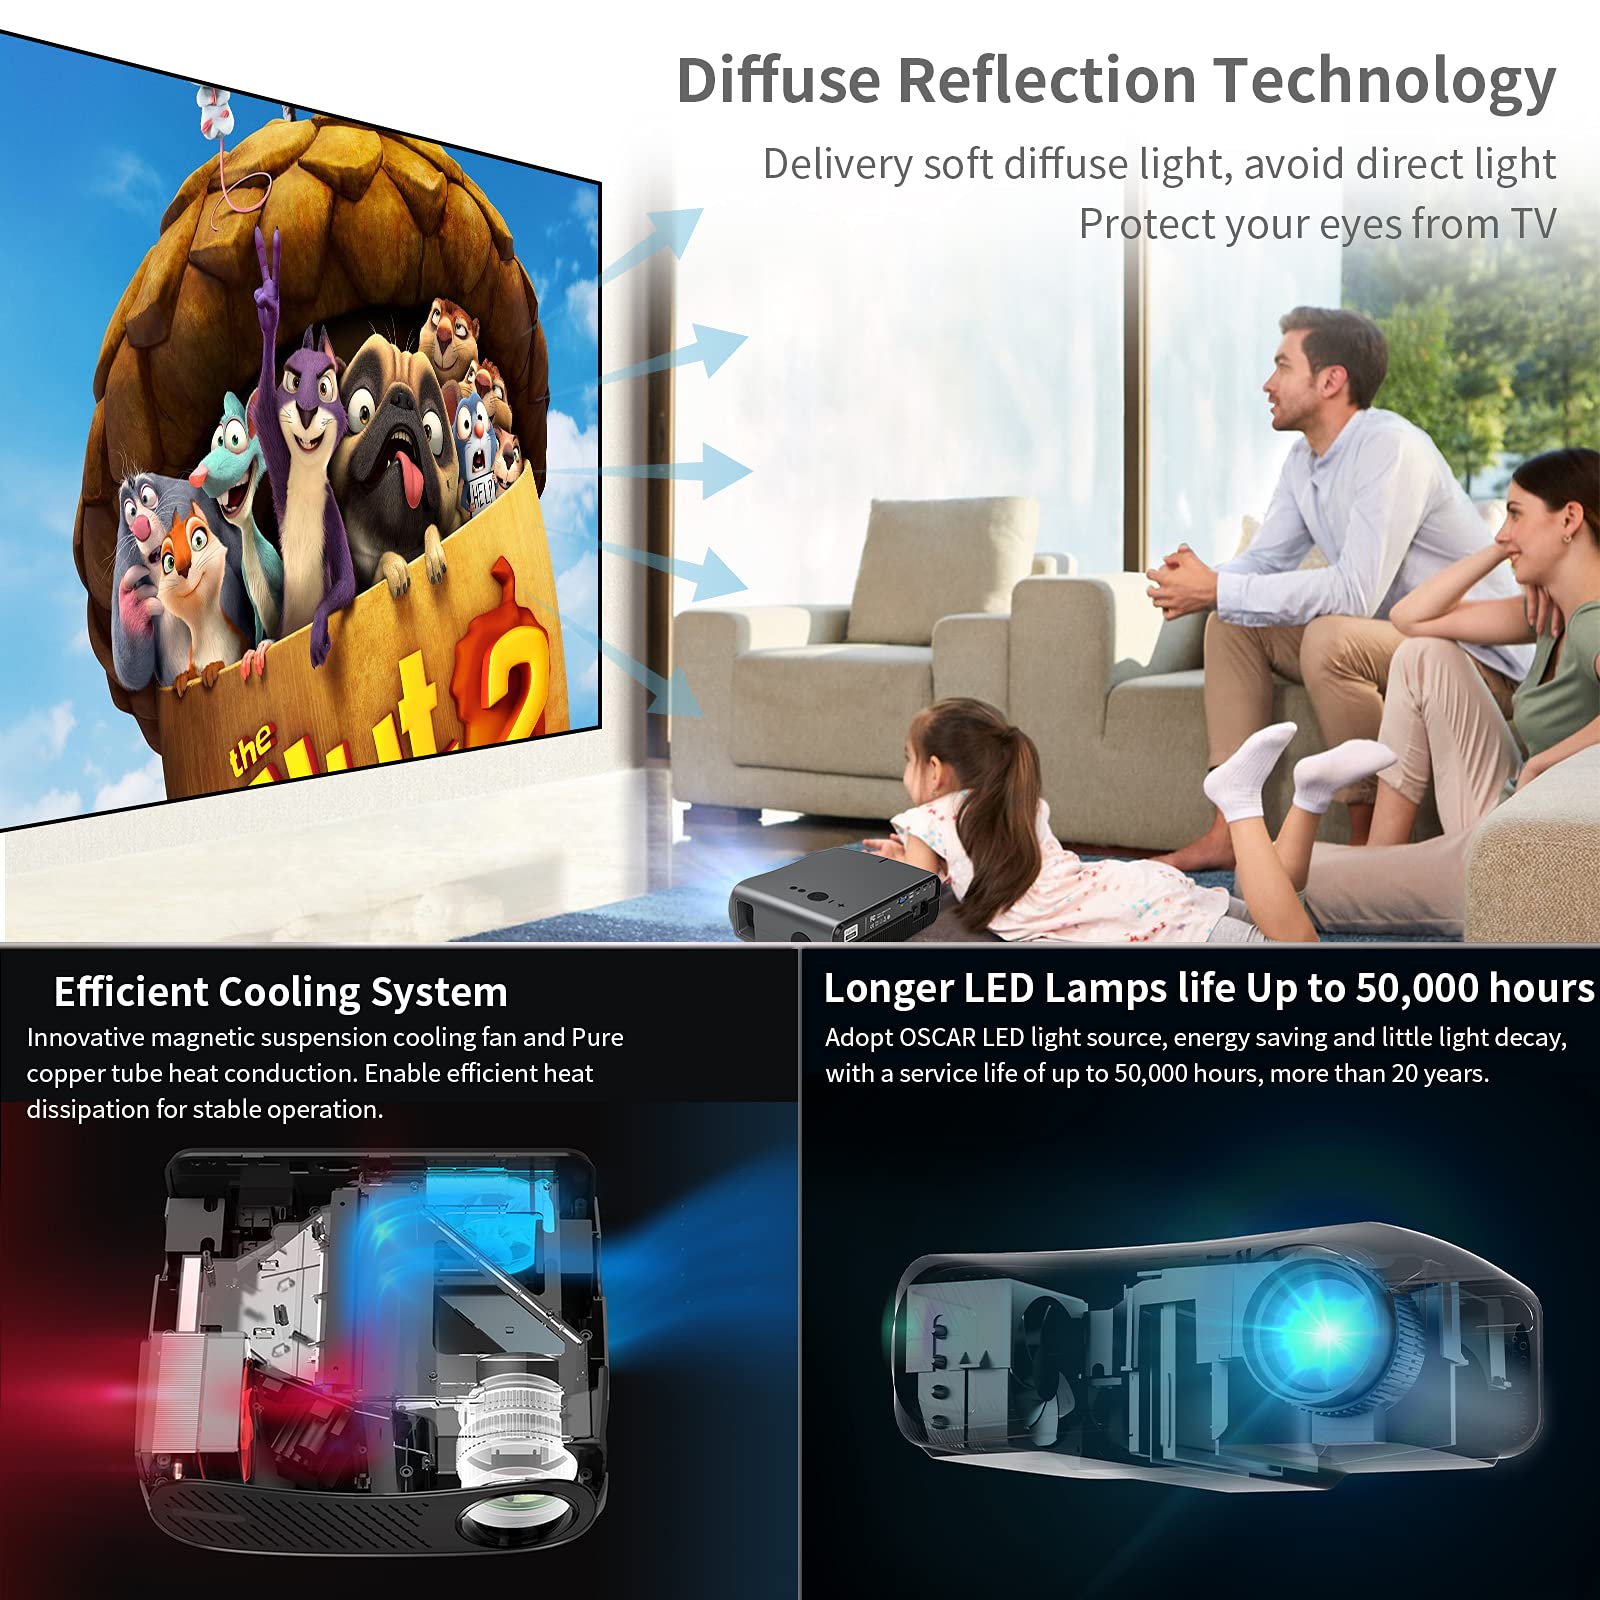 Projector 4K Supported,Native 1080P Wireless Smart Projector with 5G WiFi and Bluetooth,10000LM Video Gaming Projector with 2+16G Android TV,4D/Auto Keystone,Zoom for Phone,Tablet,PC,TV Stick,Laptop